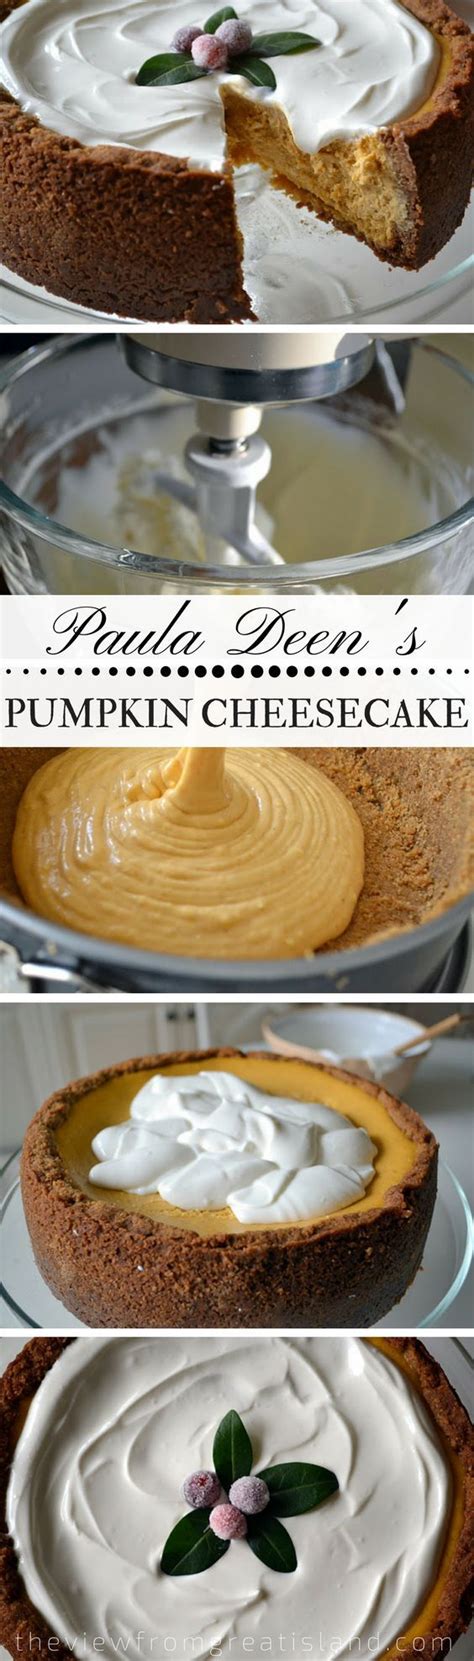 Paula deen | cooking and family are the greatest gifts. Paula Deen's Pumpkin Cheesecake ~ this mile high, super creamy cheesecake is a spectacula… (With ...